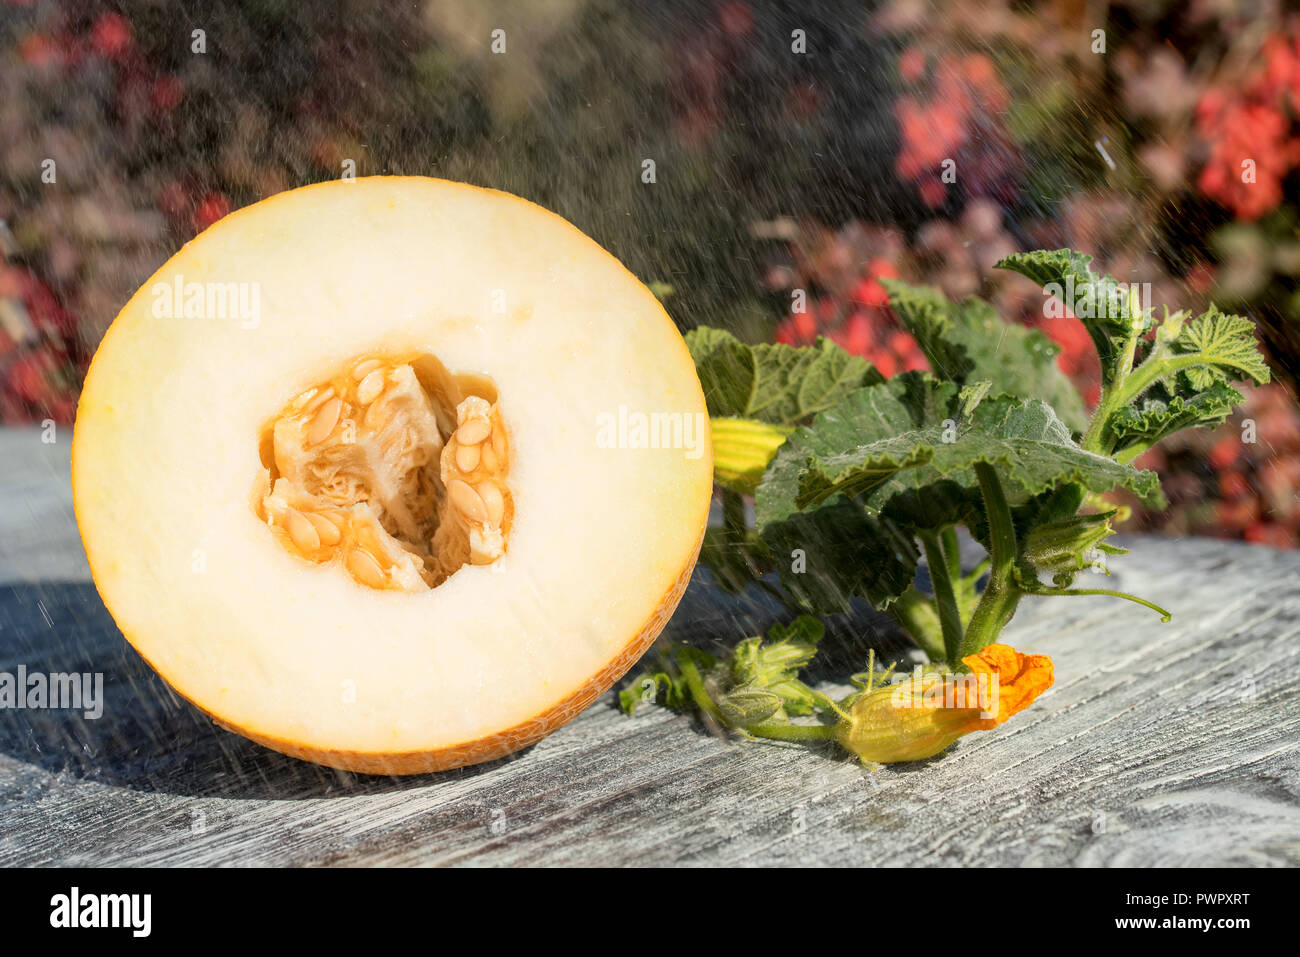 Half of melon on wooden table outdoors Stock Photo